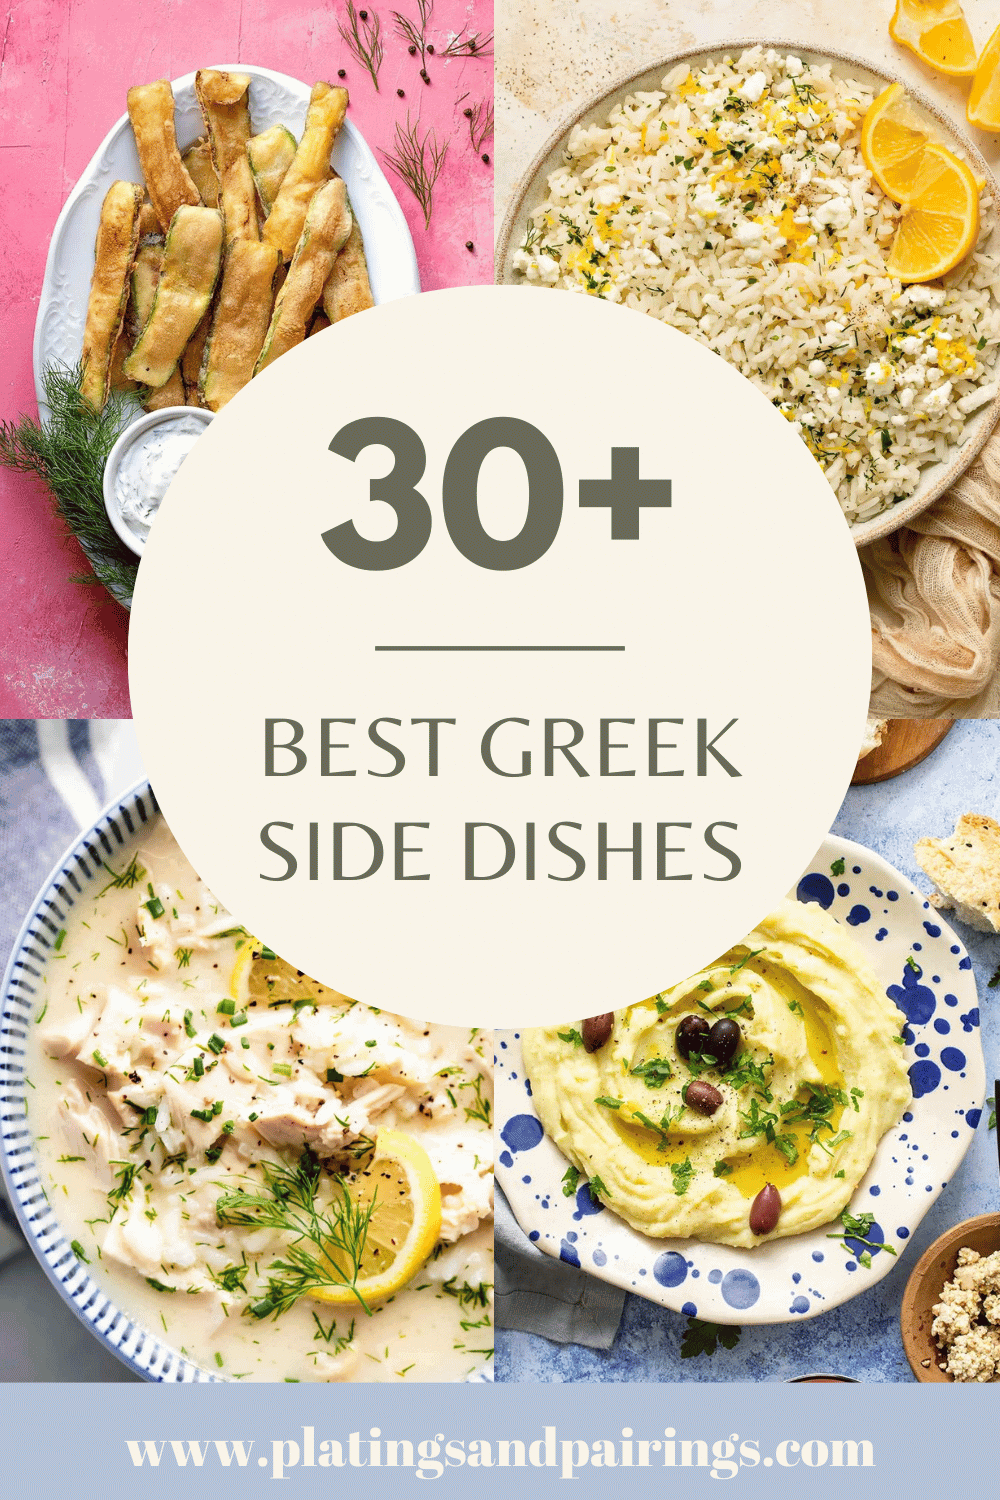 Collage of Greek side dishes with text overlay.